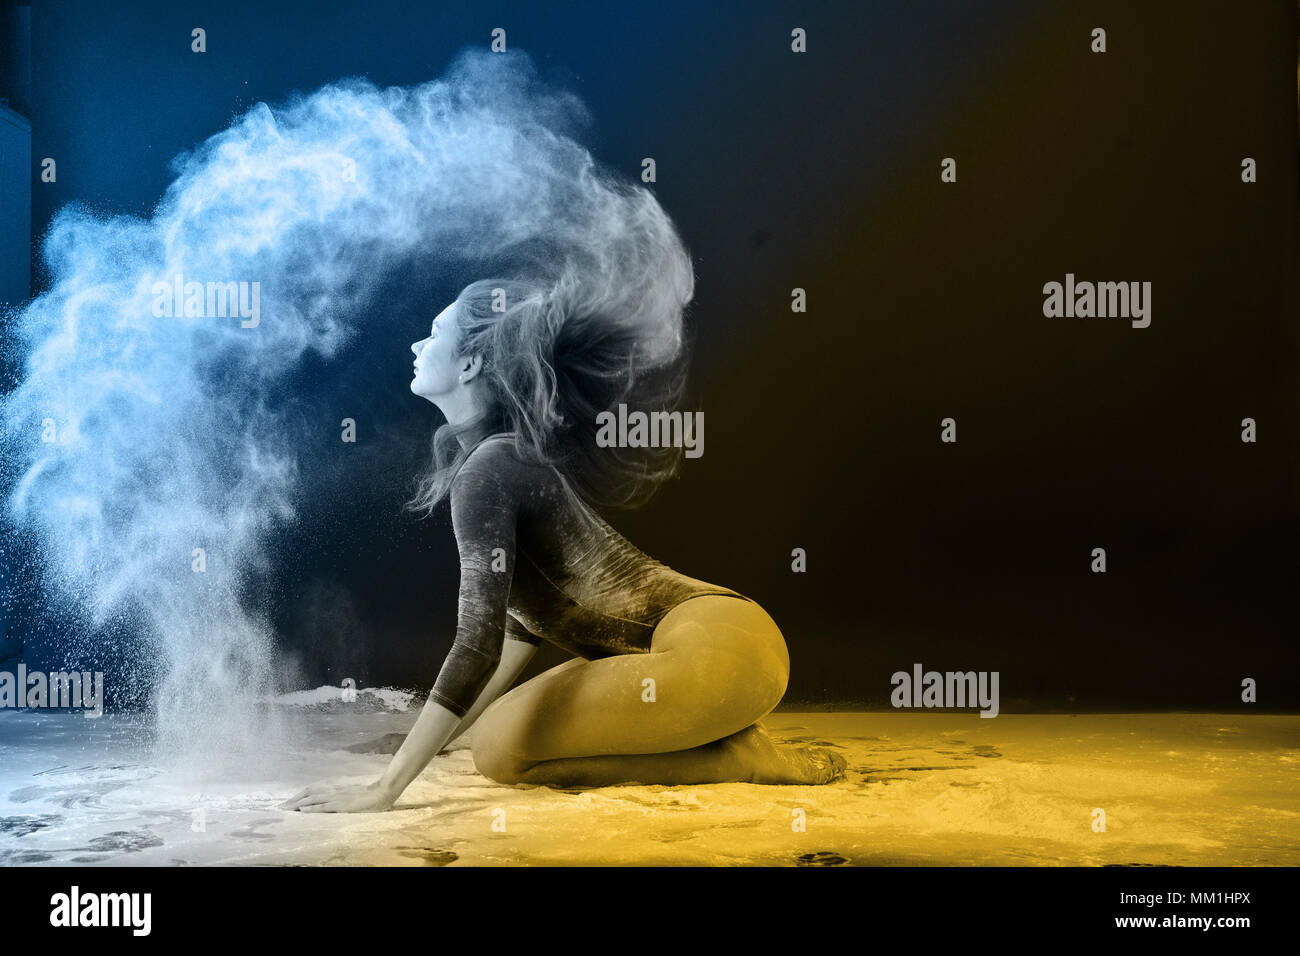 Slender girl dancing in white dust, Studio shot. Illuminated with colored lanterns. Blue and mustard on black background Stock Photo